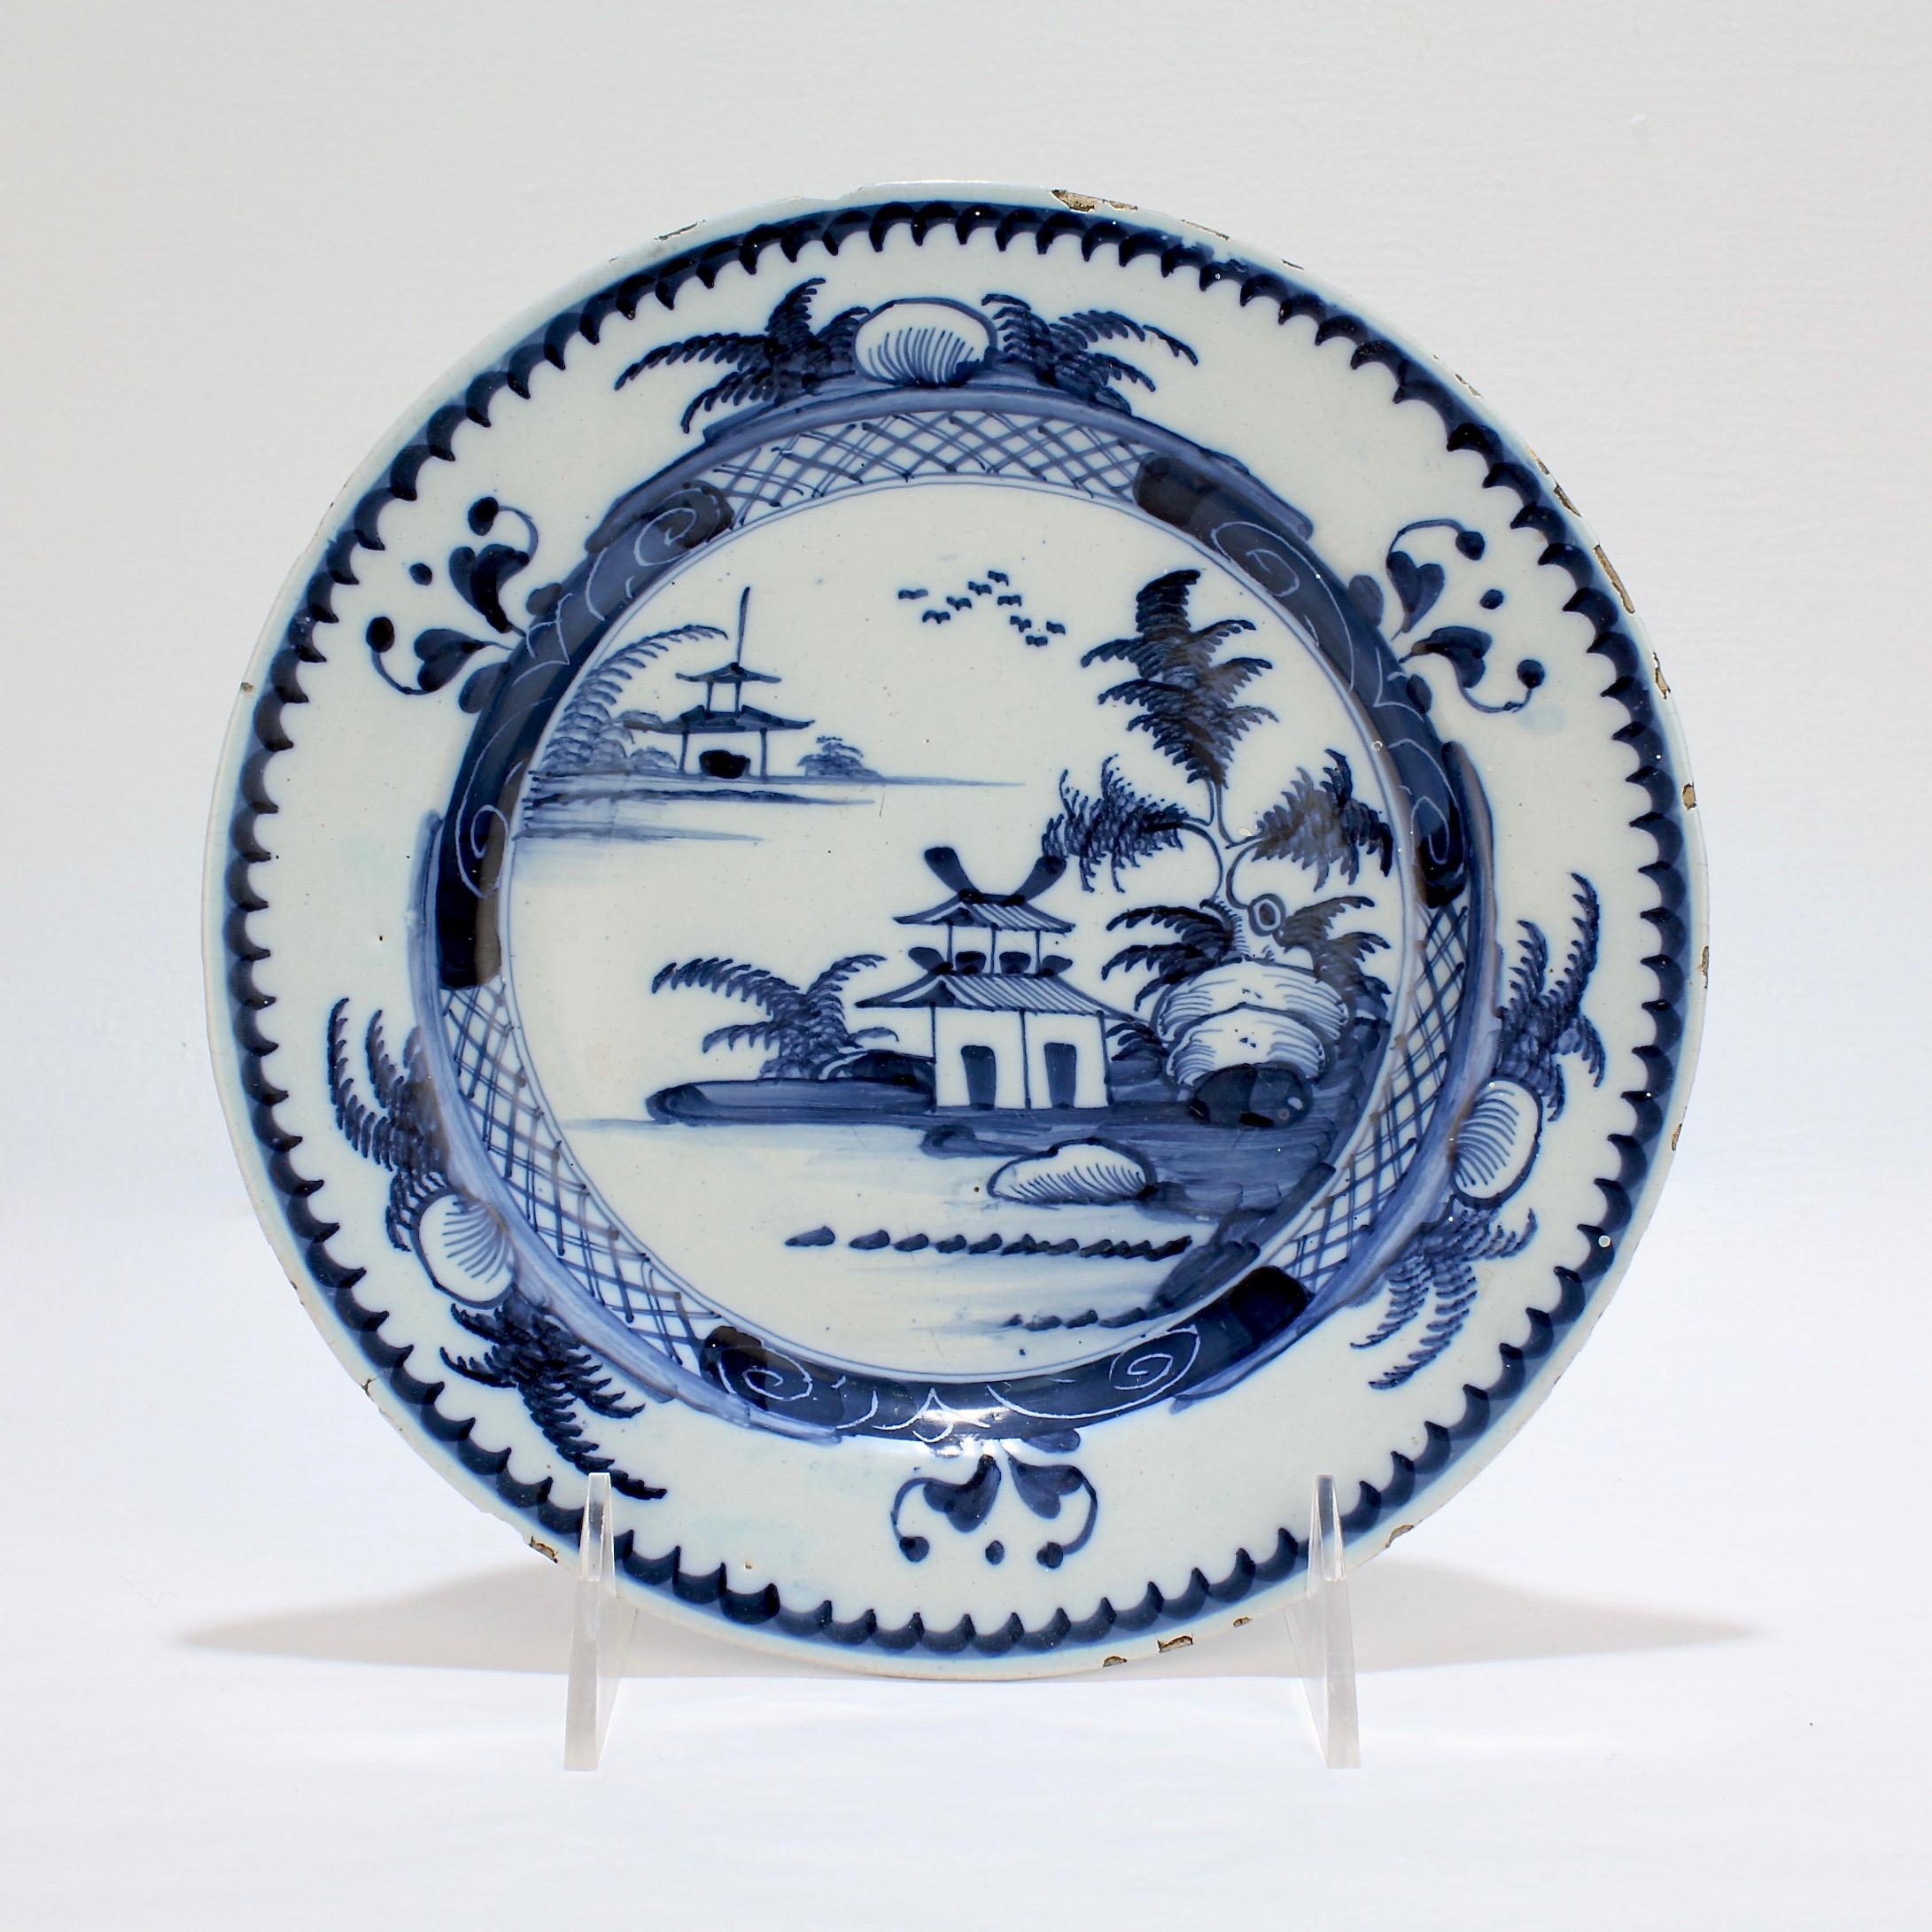 A good, antique English delft plate.

Likely Lambeth with deep blue chinoiserie decoration and a sawtooth border.

A fine early example with strong color!

Measures: Diameter ca. 7 7/8 in.

Items purchased from this dealer must delight you.